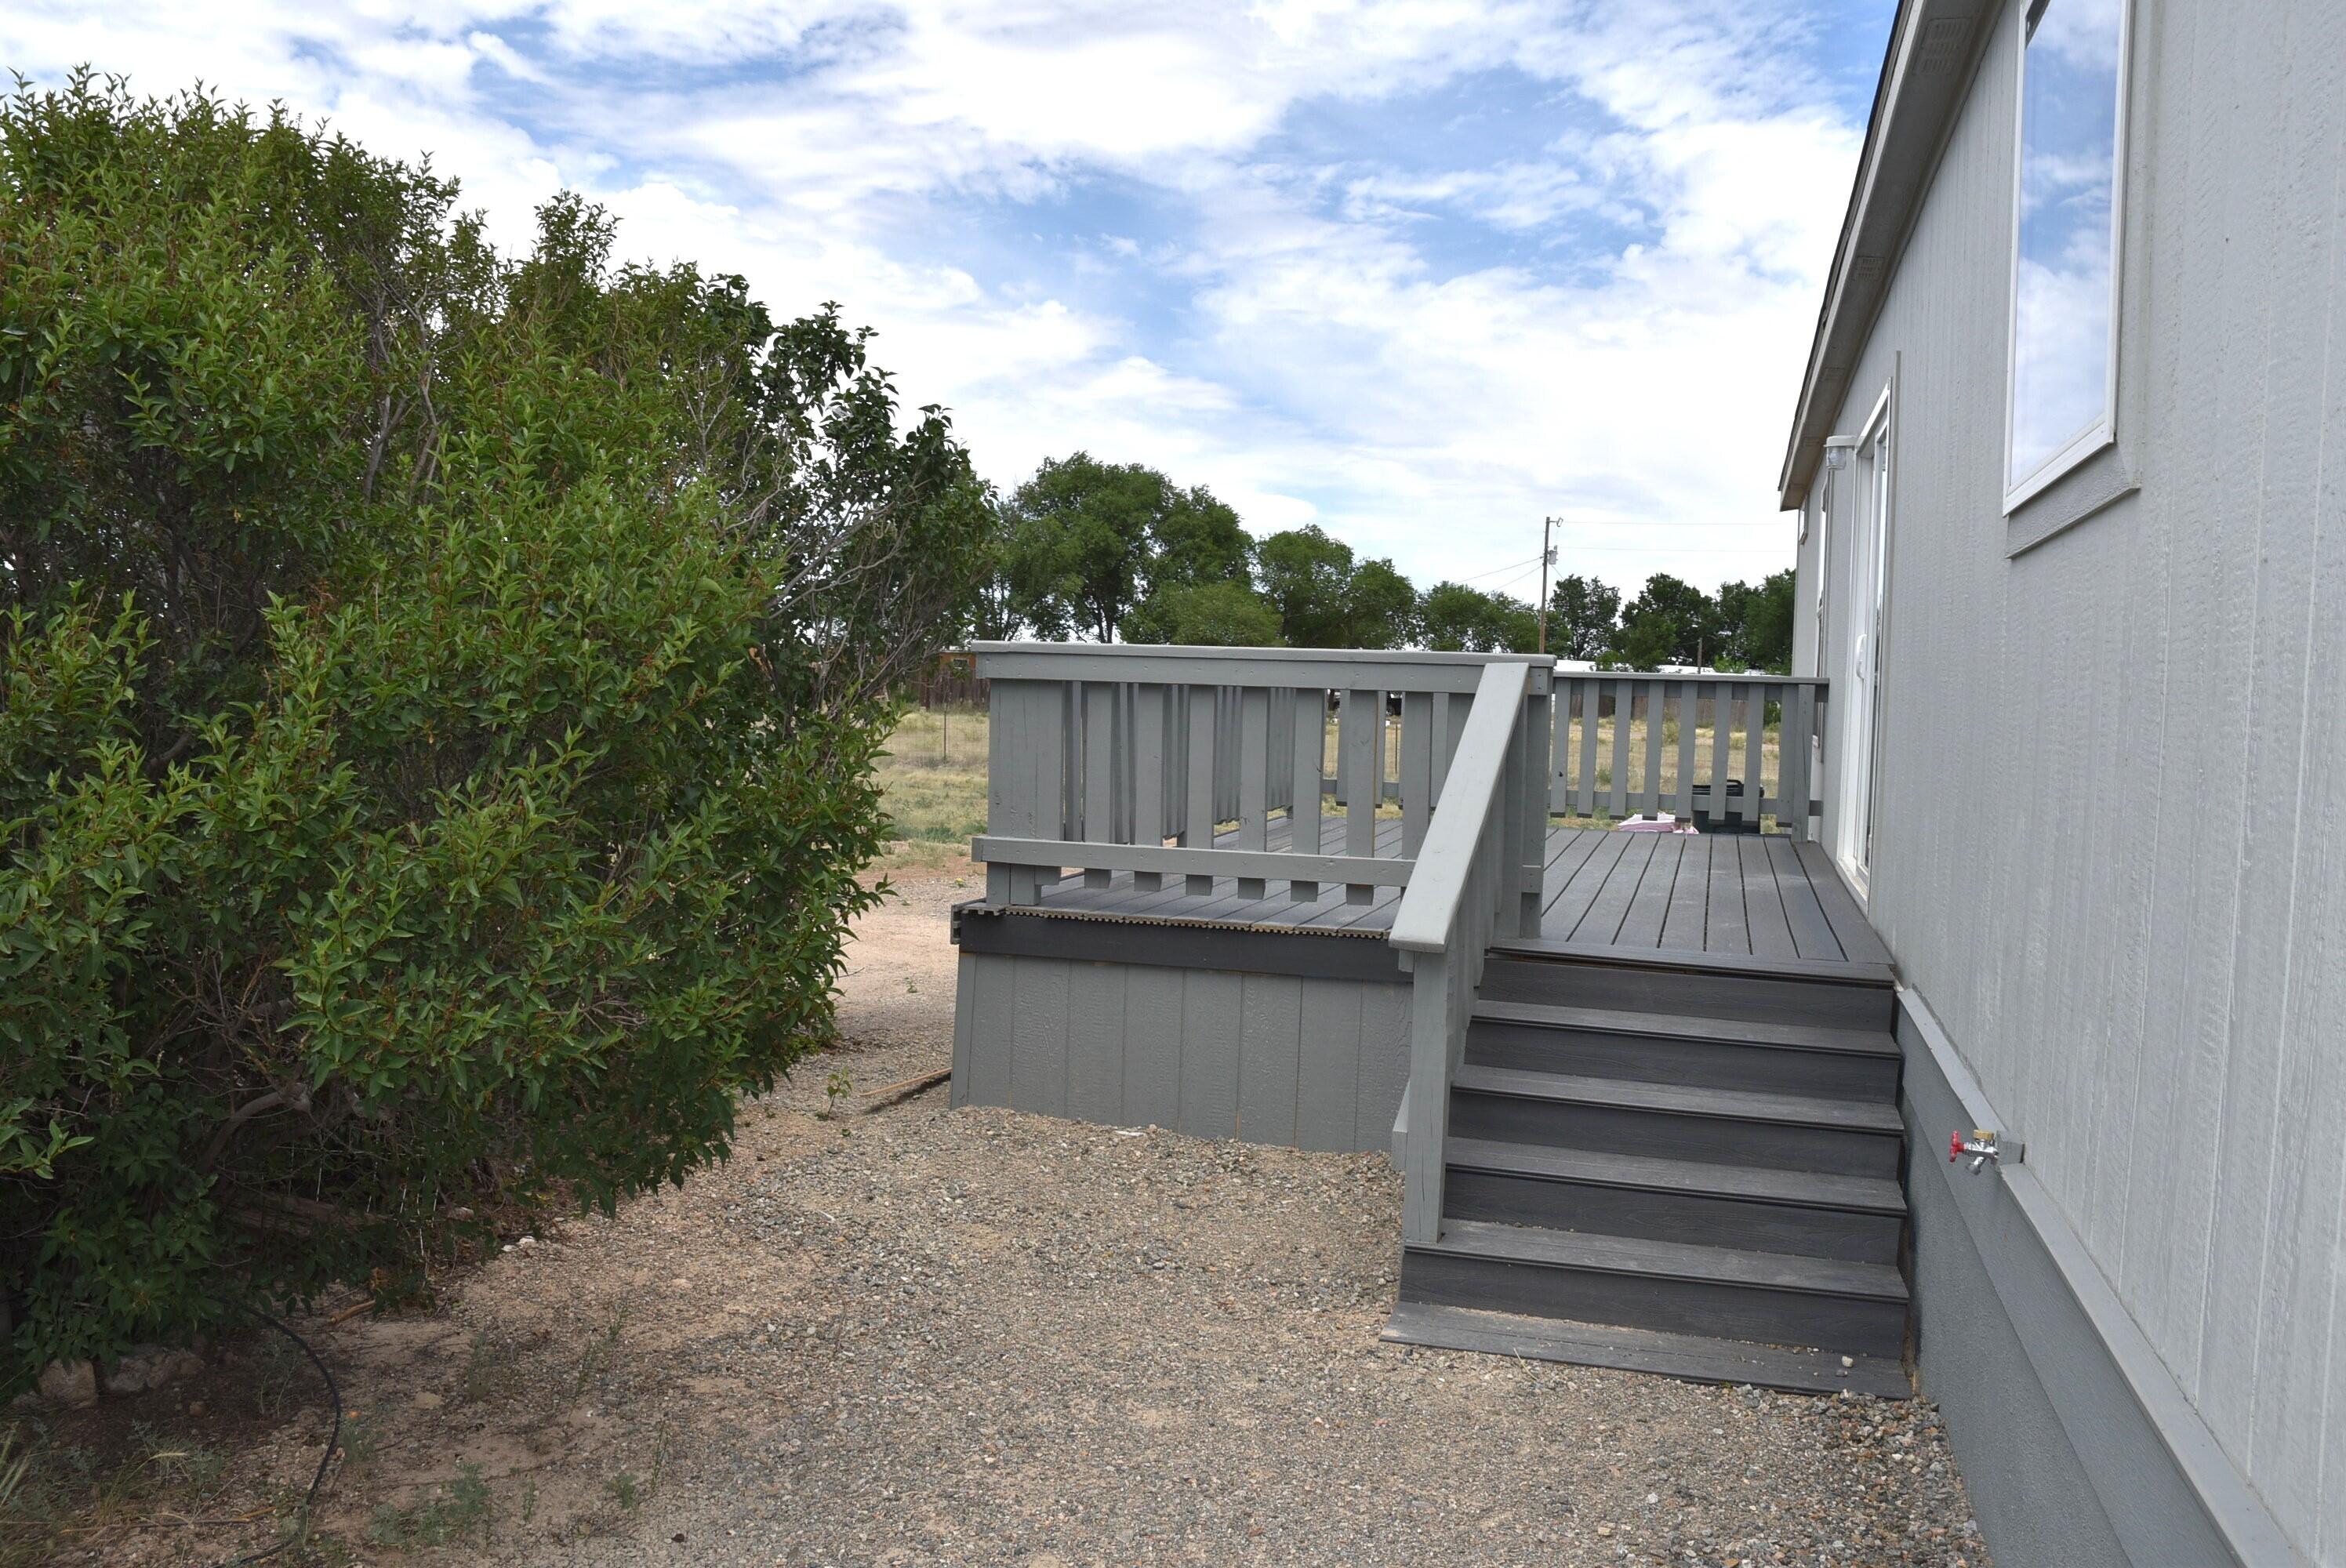 36 Dilbert Drive, Moriarty, New Mexico 87035, 3 Bedrooms Bedrooms, ,2 BathroomsBathrooms,Residential,For Sale,36 Dilbert Drive,1038091